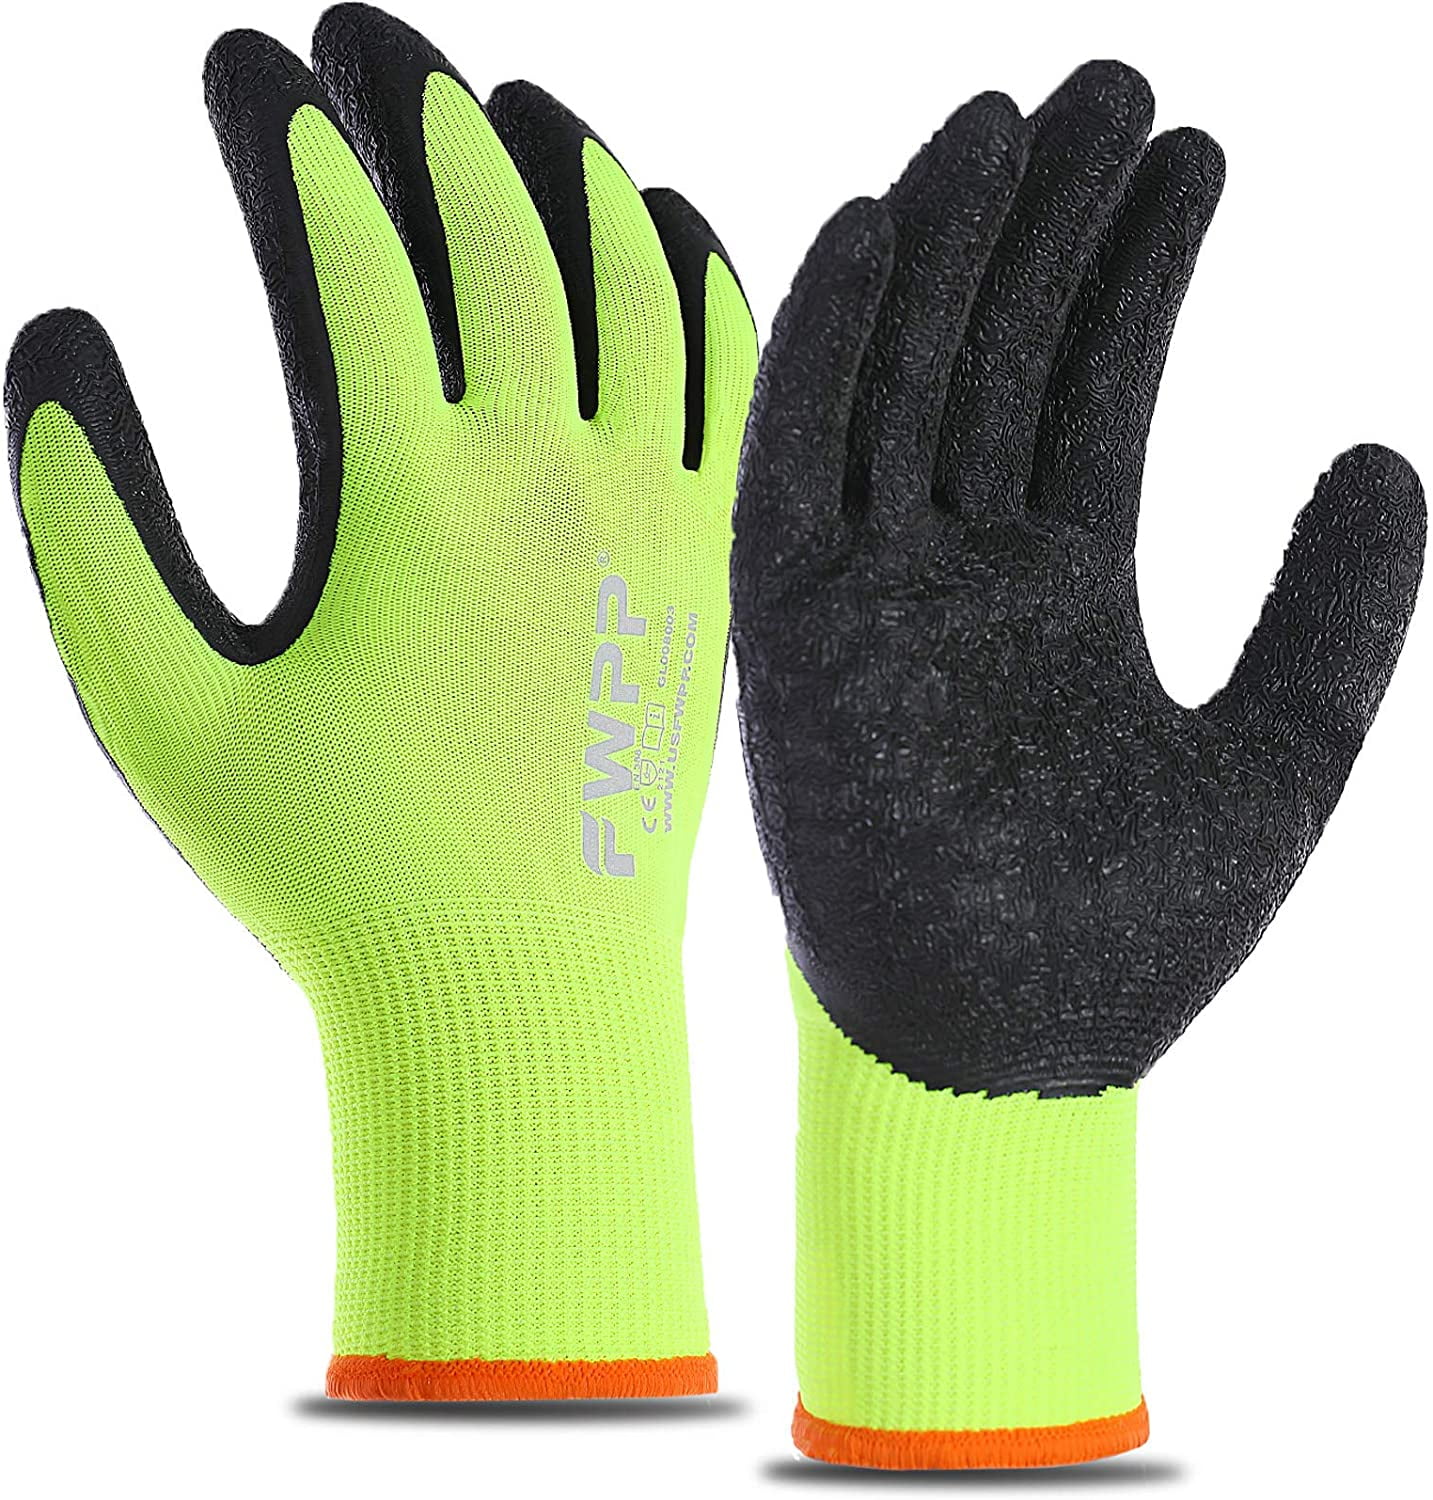 New Unisex Garden Gloves Latex Dipped Thick Strong Tough Grip Hand Protect 